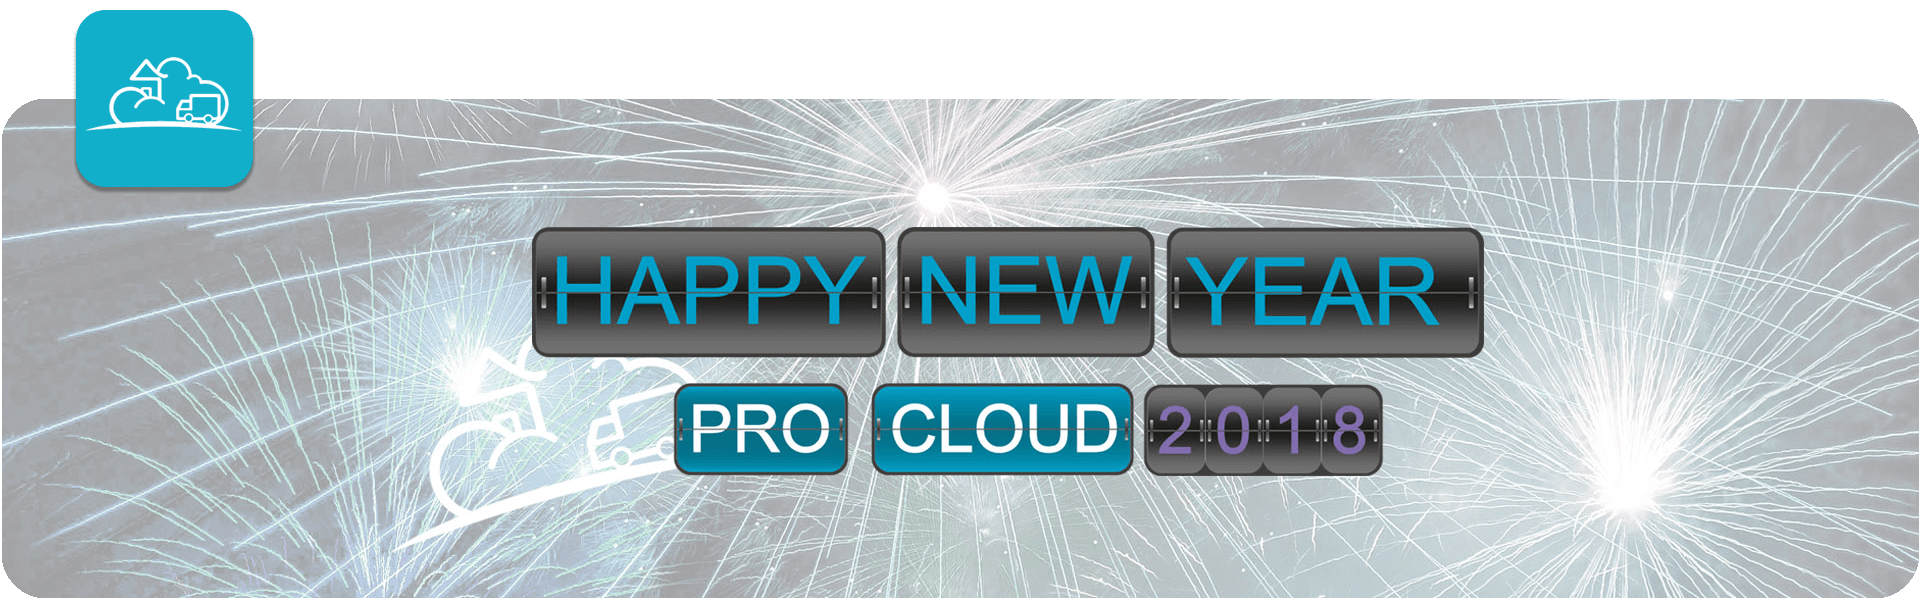 happy new year from pro0cloud 2018 banner